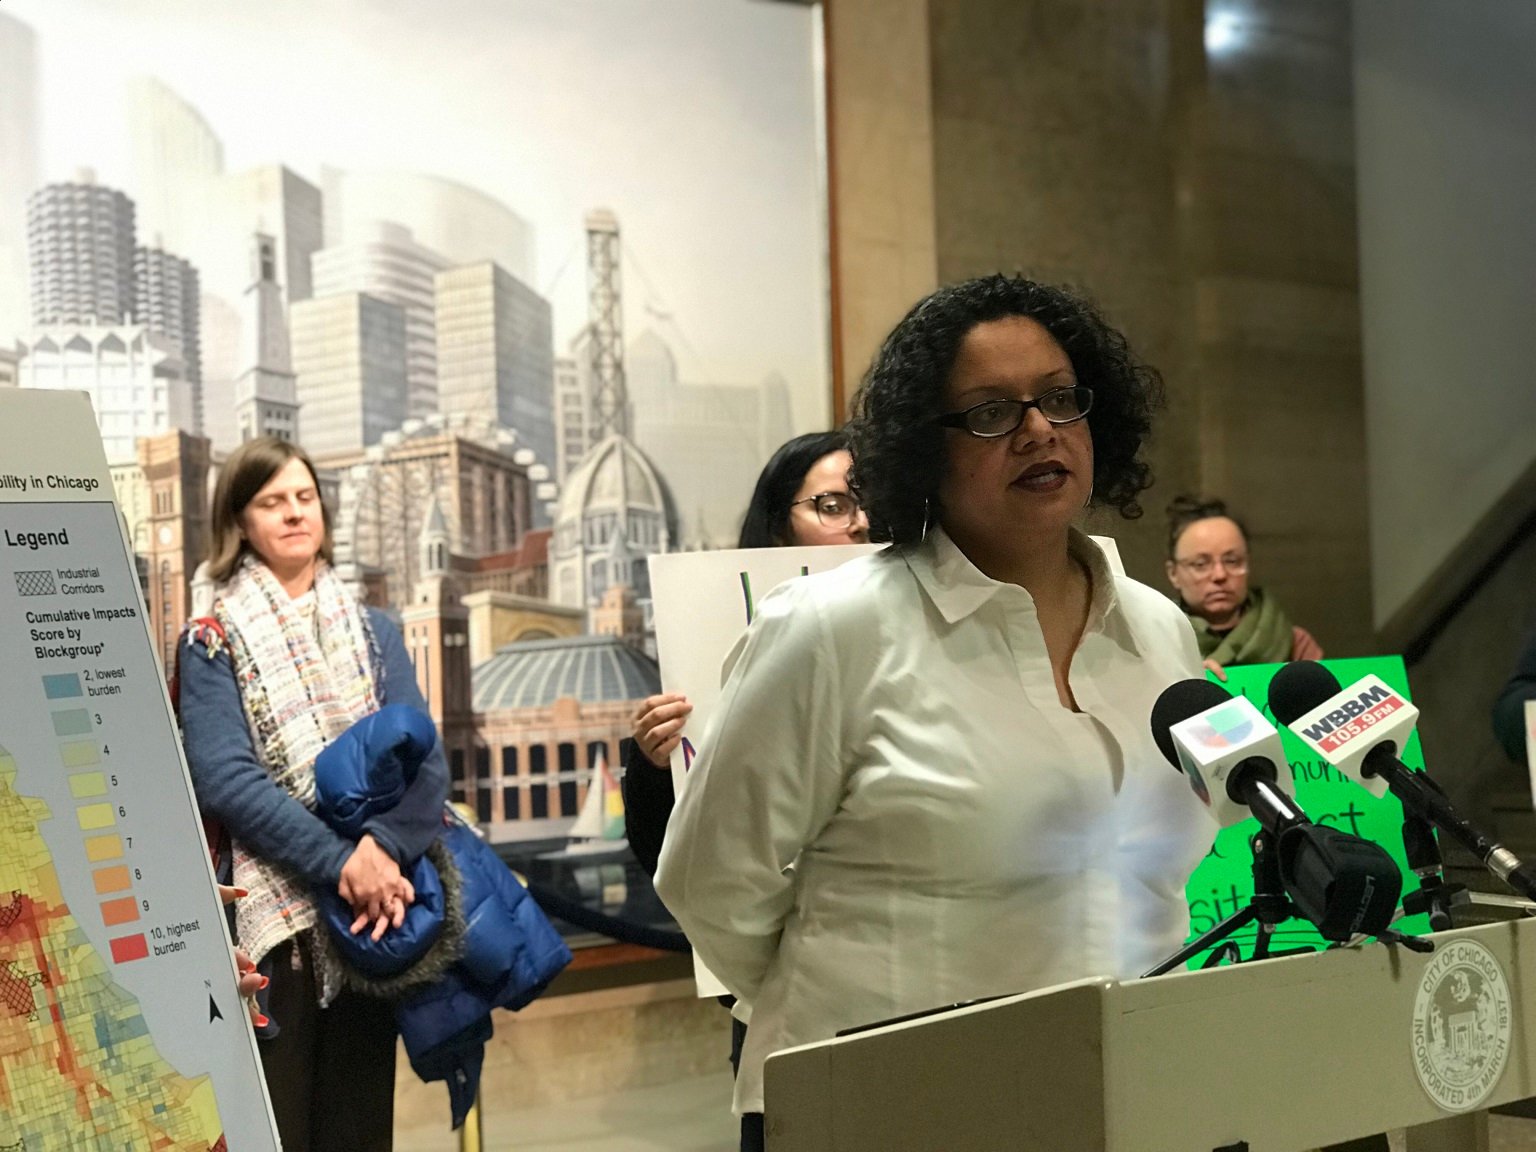 Kimberly Wasserman, executive director of the Little Village Environmental Justice Organization, speaks during a press conference Thursday in response to a new renewable energy plan unveiled by Mayor Rahm Emanuel. (Courtesy Little Village Environmental Justice Organization)